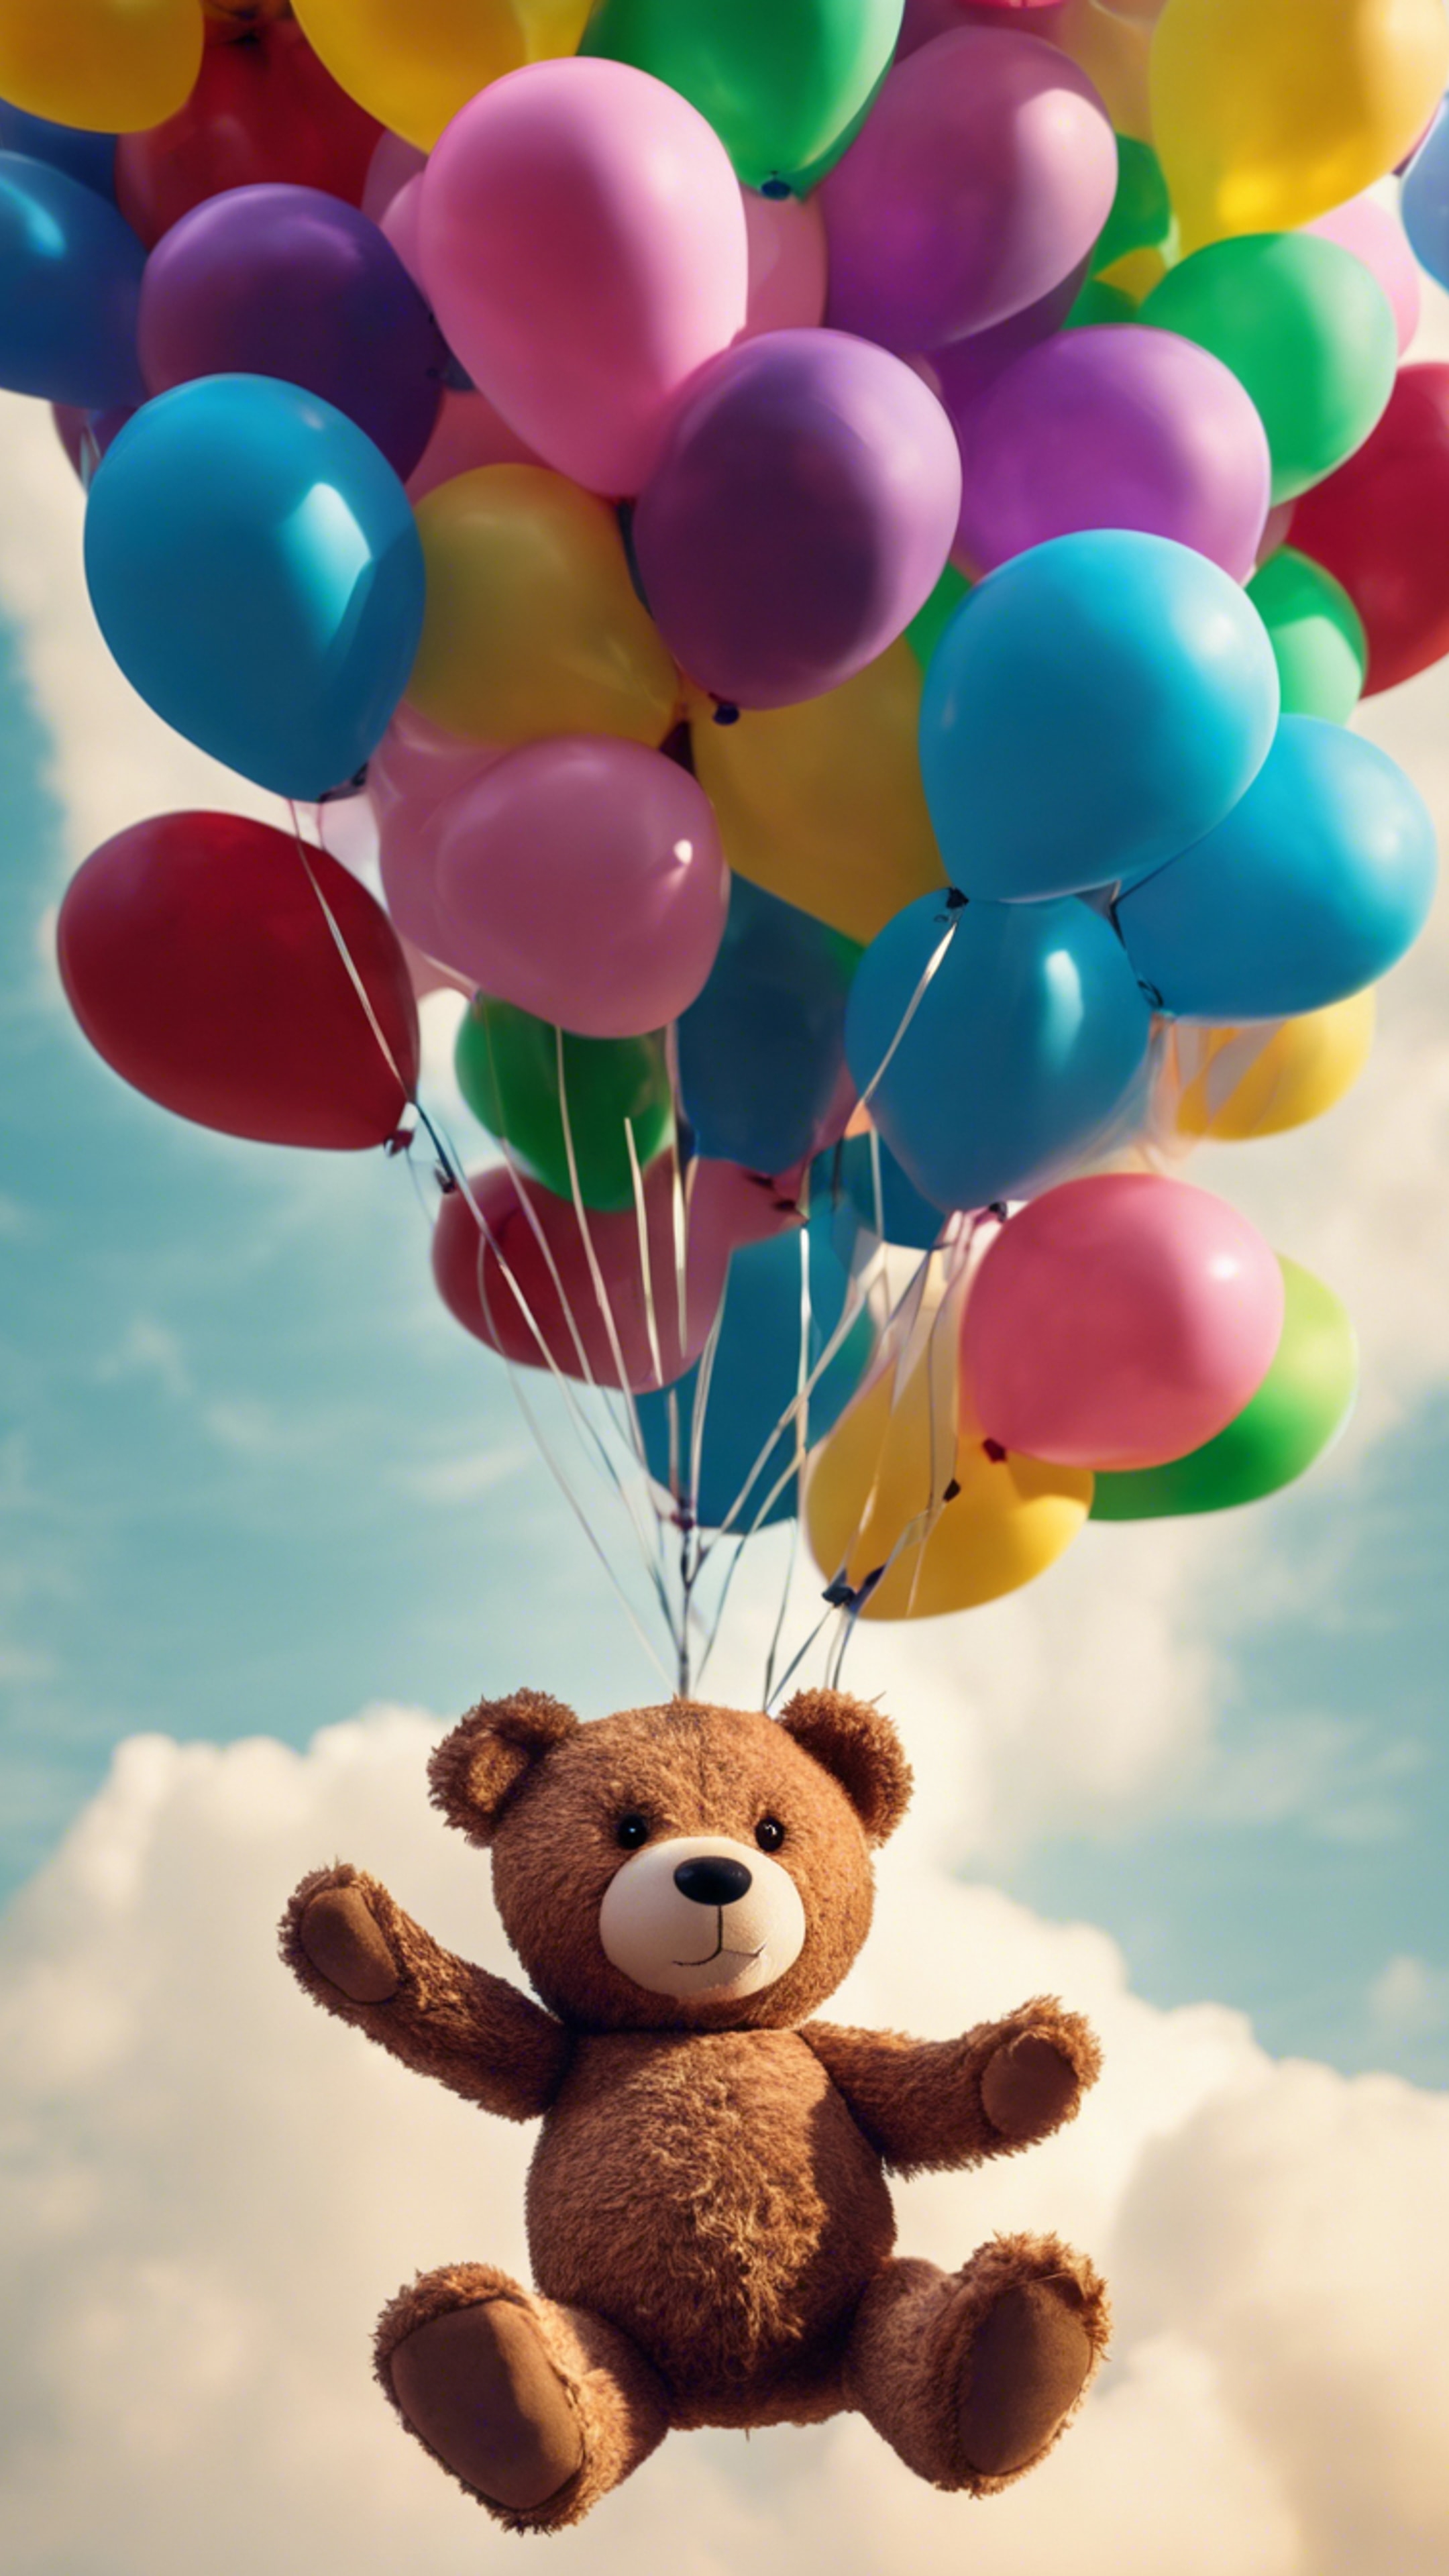 A teddy bear floating in the sky suspended to a set of colorful helium balloons.壁紙[3cd150b054934ab09e64]